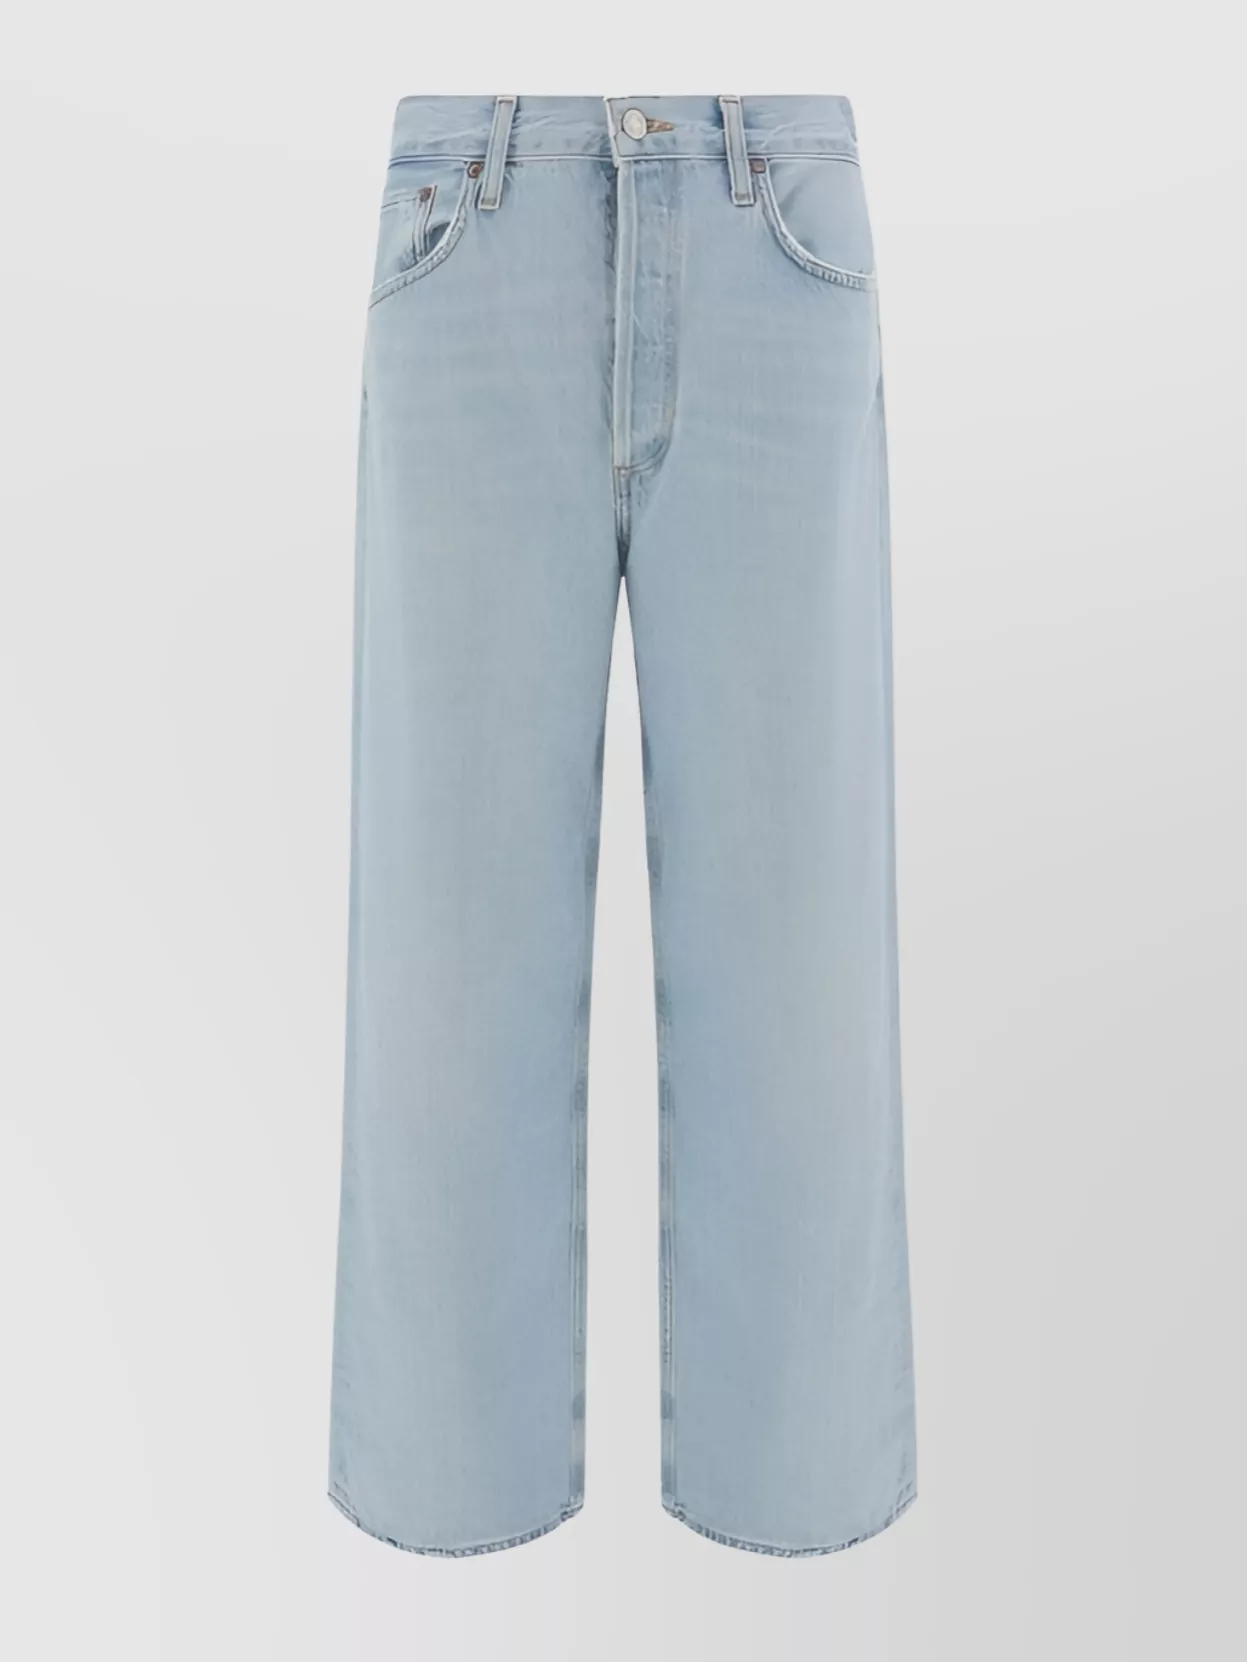 Shop Agolde Relaxed Fit Denim Trousers